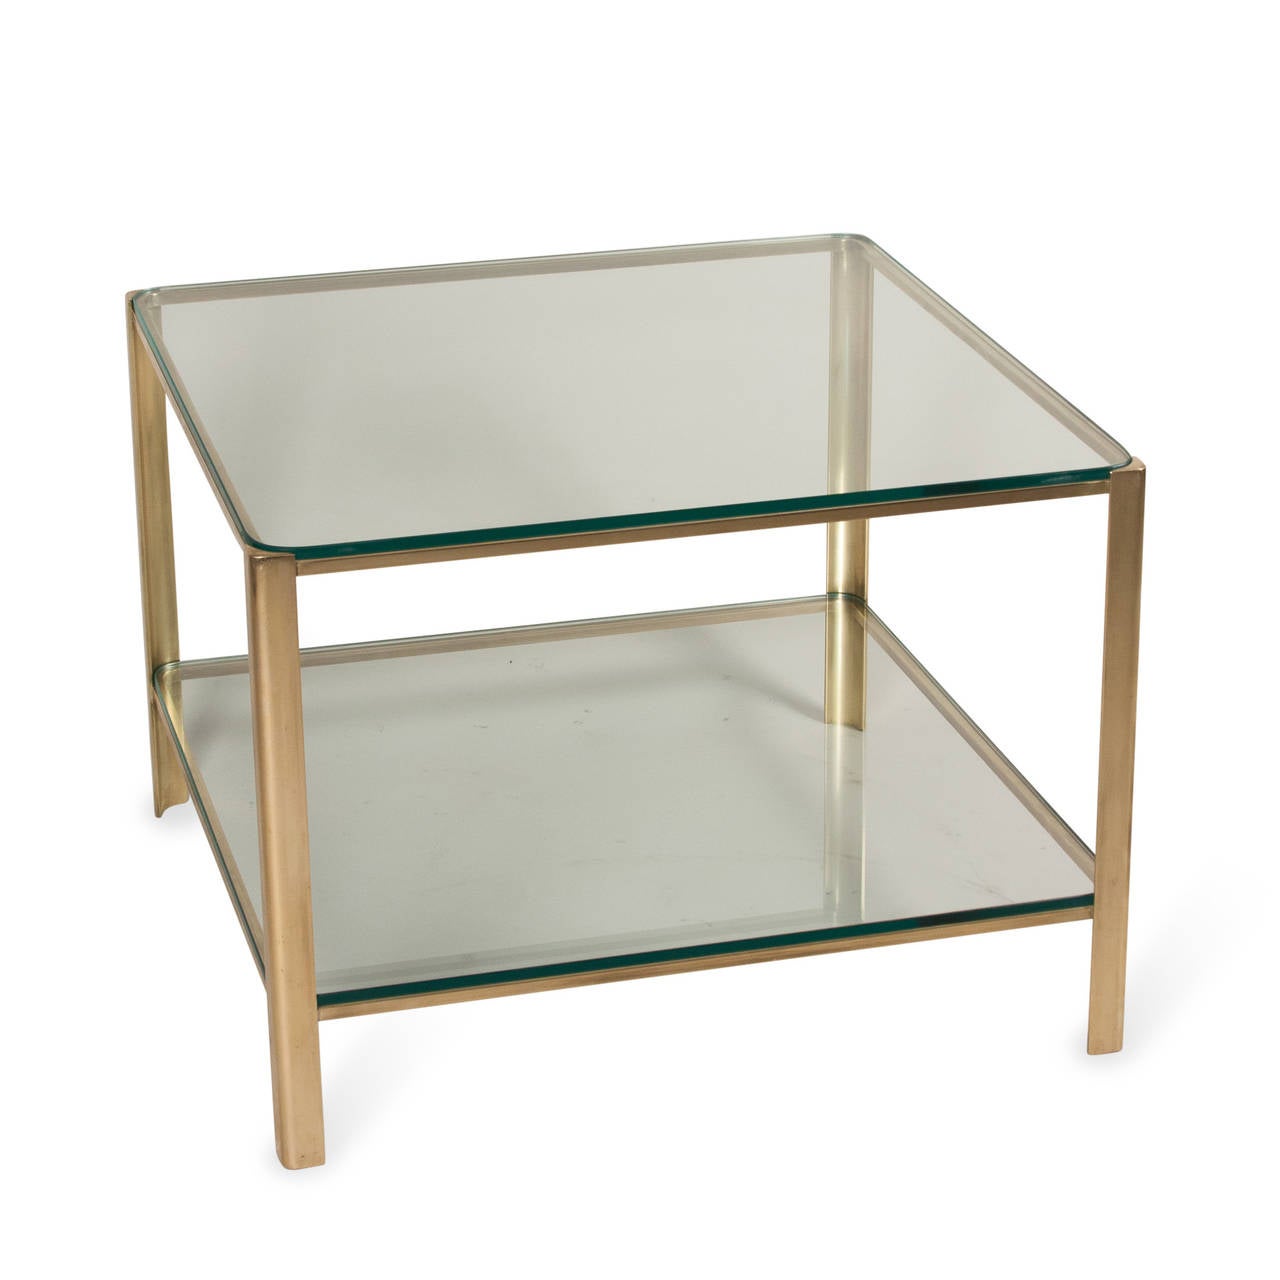 Brass frame square coffee table, glass top with rounded corners, lower glass shelf, by Maison Malabert, French, 1940s. Stamped markings to inside edge. Attributed to Jacques Quinet. Measures: 24 in square, height 17 in.